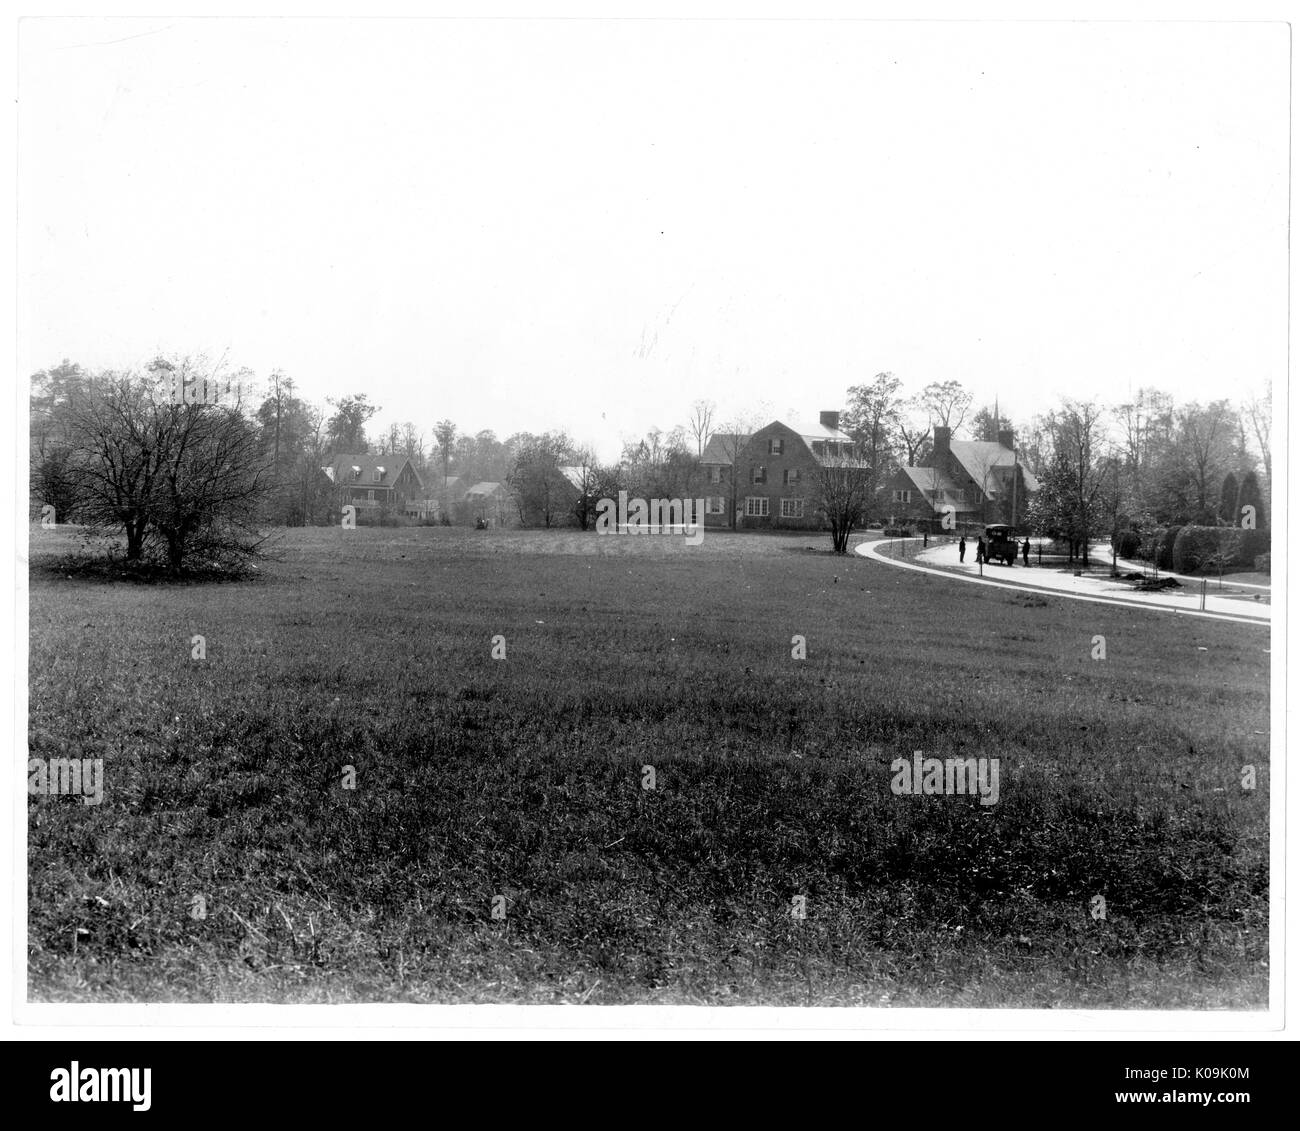 A large open area of grass lays in front of a large house near Guilford, the house is in the background and there is a long pathway that leads toward it, there are trees on the property, most of the trees are near the house, Baltimore, Maryland, 1910. This image is from a series documenting the construction and sale of homes in the Roland Park/Guilford neighborhood of Baltimore, a streetcar suburb and one of the first planned communities in the United States. The neighborhood was segregated, and is considered an early example of the enforcement of racial segregation through the use of restrict Stock Photo